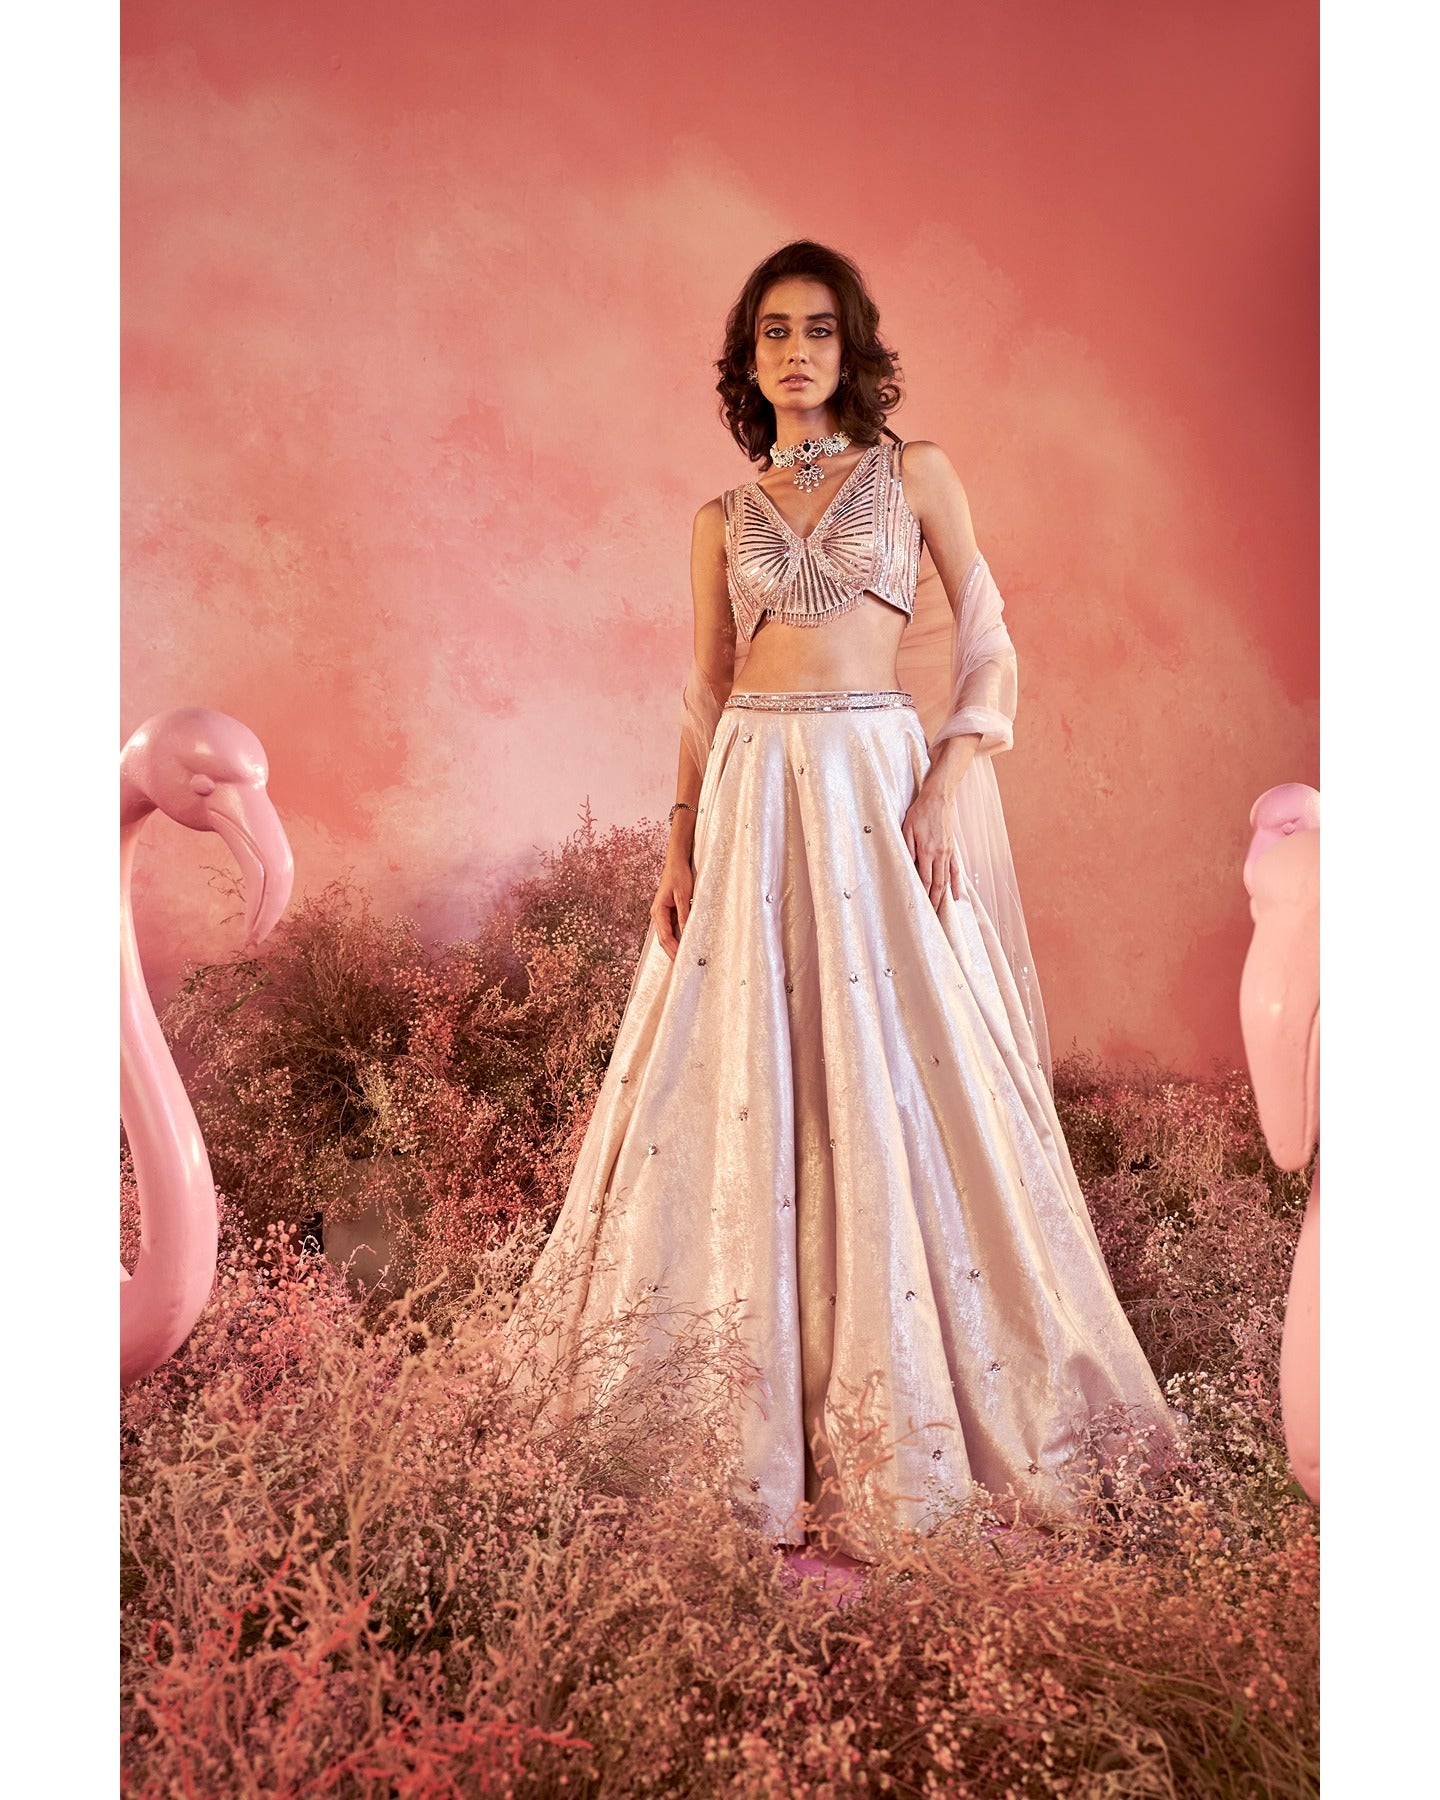 Whispers of elegance in soft pink hues, each stitch telling a story of meticulous hand embroidery. A timeless blend of grace and craftsmanship.